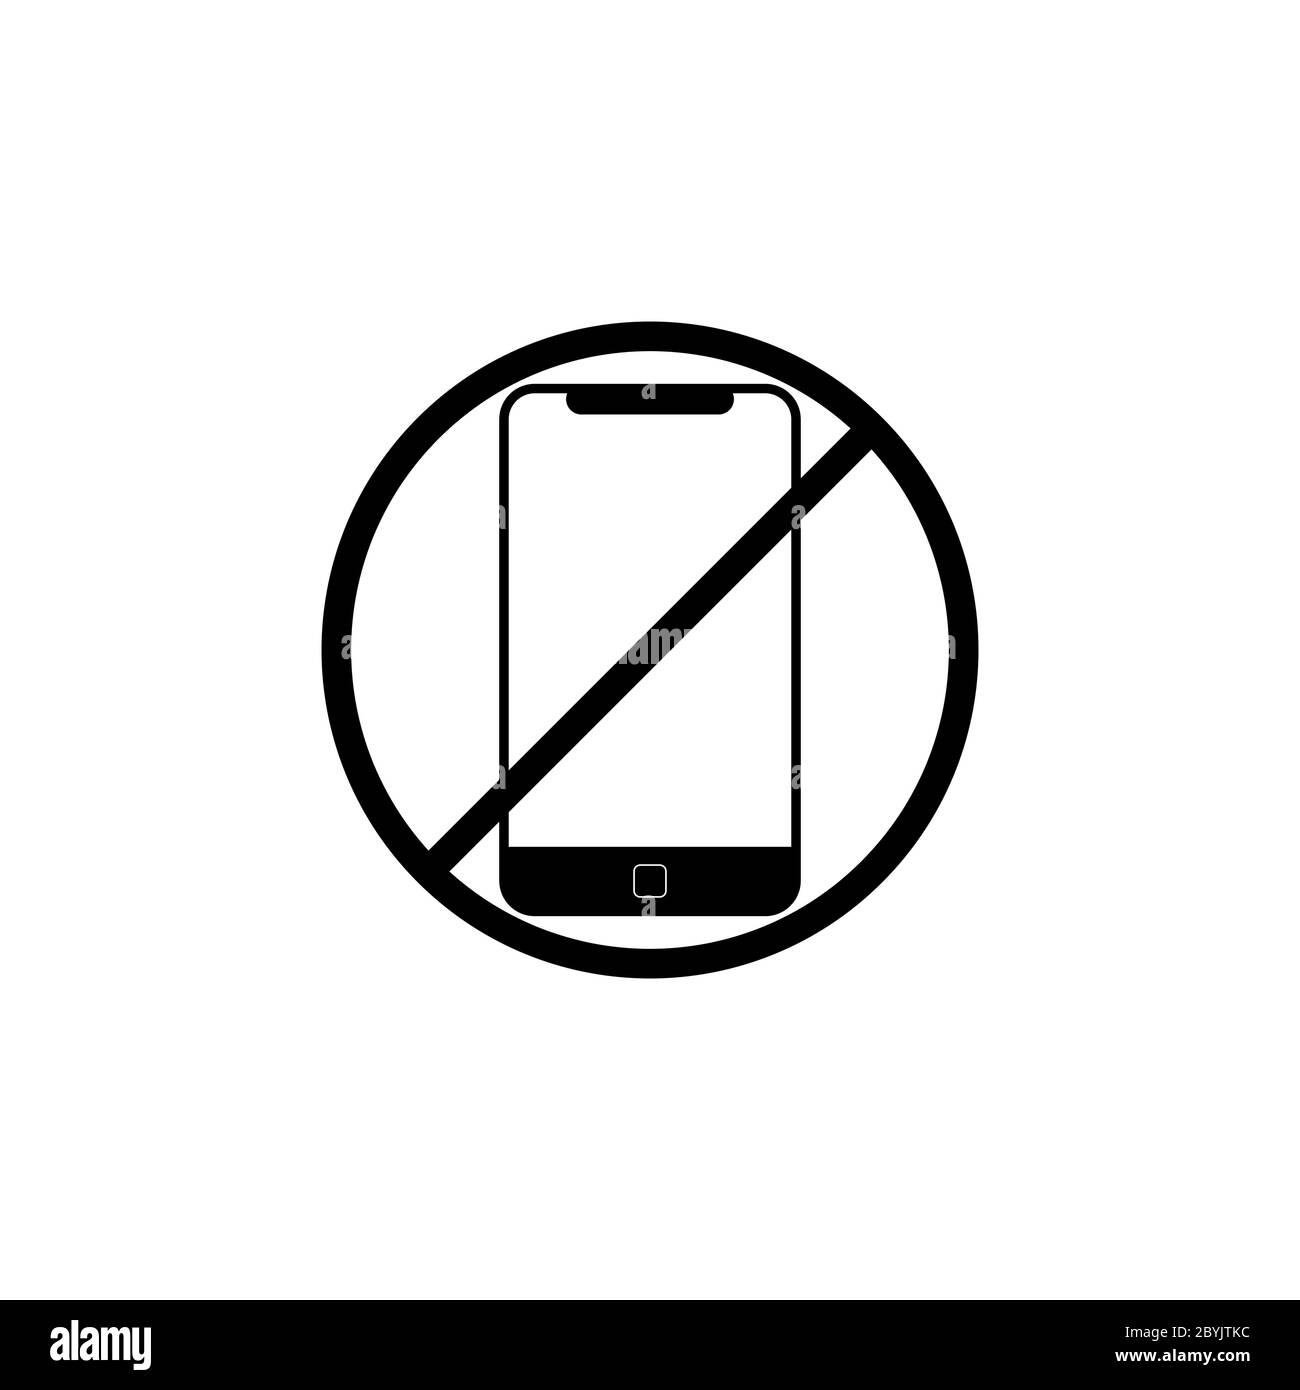 No cell phone sign or don't ring or turn off the phone icon in black on an isolated white background. EPS 10 vector. Stock Vector